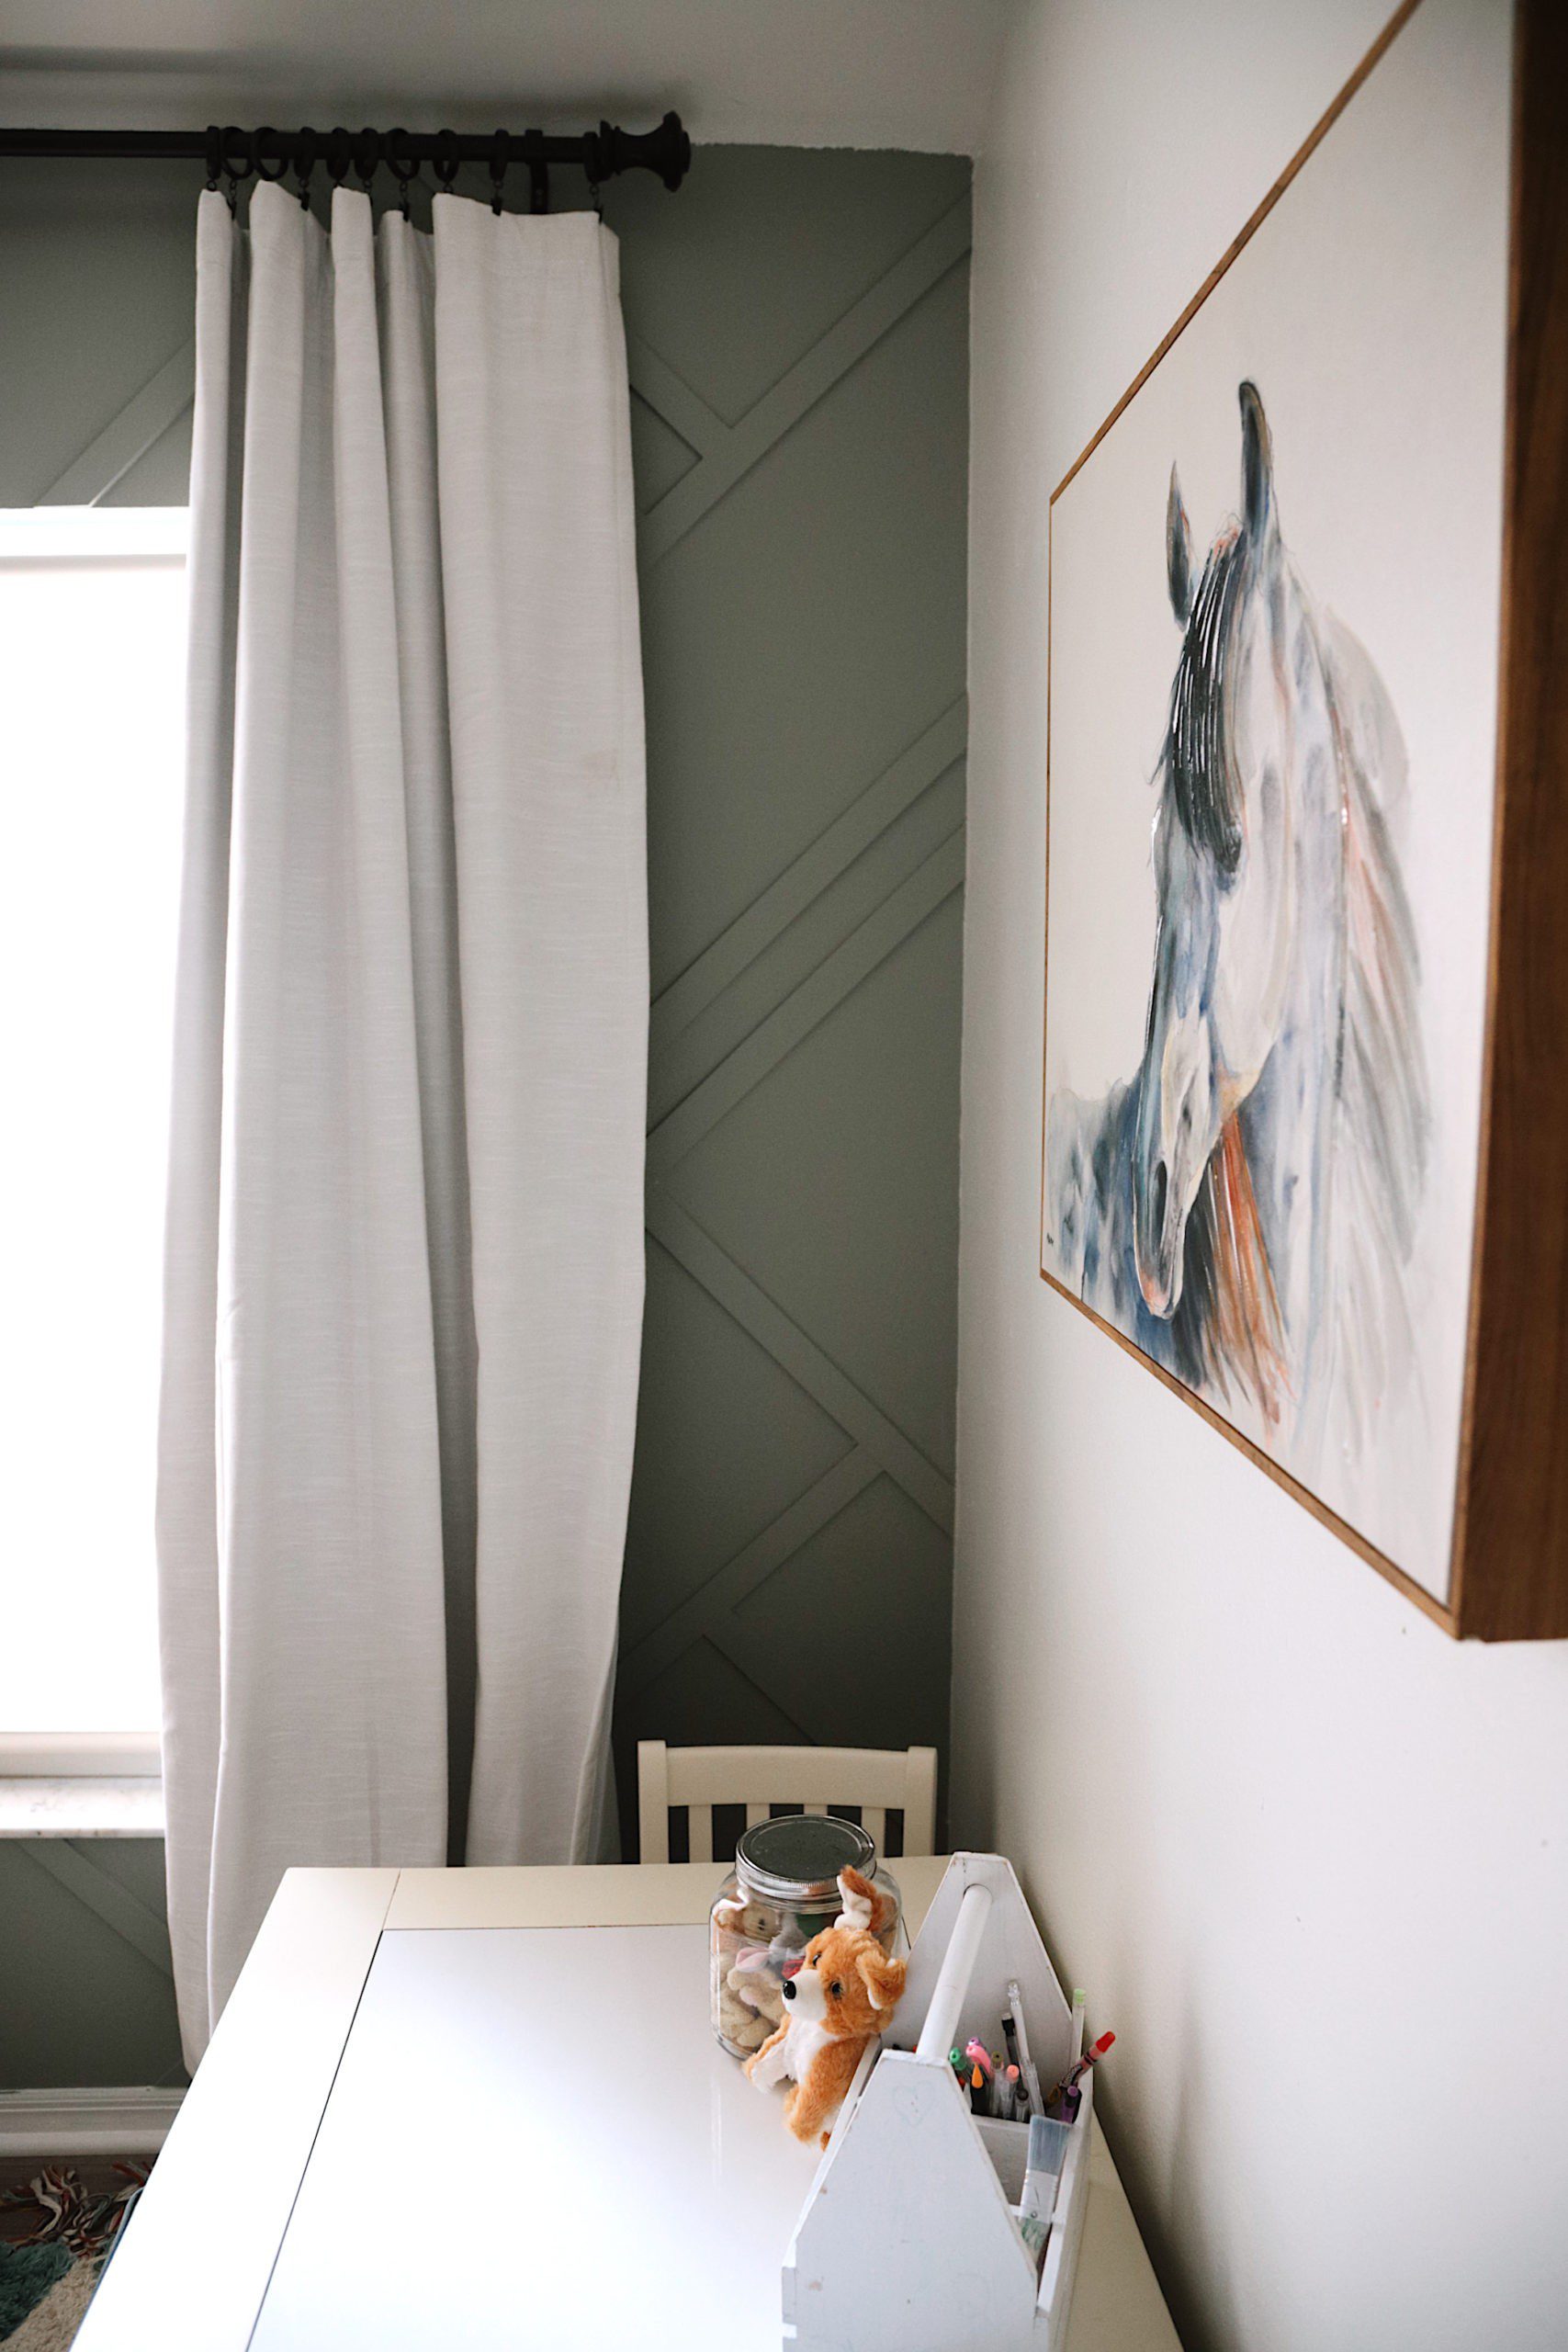 Shared girls' room design with DIY accent wall with one of Valspar's 12 new colors of the year for 2020, Secret Moss. For their 12 shades for 2020, Valspar sought to bring the tranquility of nature into a room to create naturally therapeutic, serene spaces. I love how this dusky moss green (with a hint towards gray) creates a calming escape in our girls' room. We went with one of Valspar's 12 new colors of the year for 2020, Secret Moss. For their 12 shades for 2020, Valspar sought to bring the tranquility of nature into a room to create naturally therapeutic, serene spaces. I love how this dusky moss green (with a hint towards gray) creates a calming escape in our girls' room. We went with one of Valspar's 12 new colors of the year for 2020, Secret Moss. For their 12 shades for 2020, Valspar sought to bring the tranquility of nature into a room to create naturally therapeutic, serene spaces. I love how this dusky moss green (with a hint towards gray) creates a calming escape in our girls' room. | Gorgeous Wood Feature Wall + Shared Girl's Room Update by popular Florida home decor blog, Fresh Mommy Blog: image of a shared girls' room decorated with a Lowe's South Shore Furniture Versa Gray Maple 6-Drawer Double Dresser, Lowe's LEVOLOR Trim+Go Shadow Light Filtering Cordless Solar Shade, Lowe's allen + roth 2-Pack Black Curtain Rod Finials, Lowe's Paint Paints & Primers Paint Samples Item # 1185292 Model # 5005-2A Valspar Secret Moss Interior Paint, Lowe's DAP DryDex 8-oz White Spackling, Lowe's allen + roth Matte Black 72-in To 144-in Matte Black Steel Single Curtain Rod, and Lowe's allen + roth LL WARWICK 42-IN x 84-IN TAUP PNL 84-in Taupe Polyester Blackout Thermal Lined Single Curtain Panel.